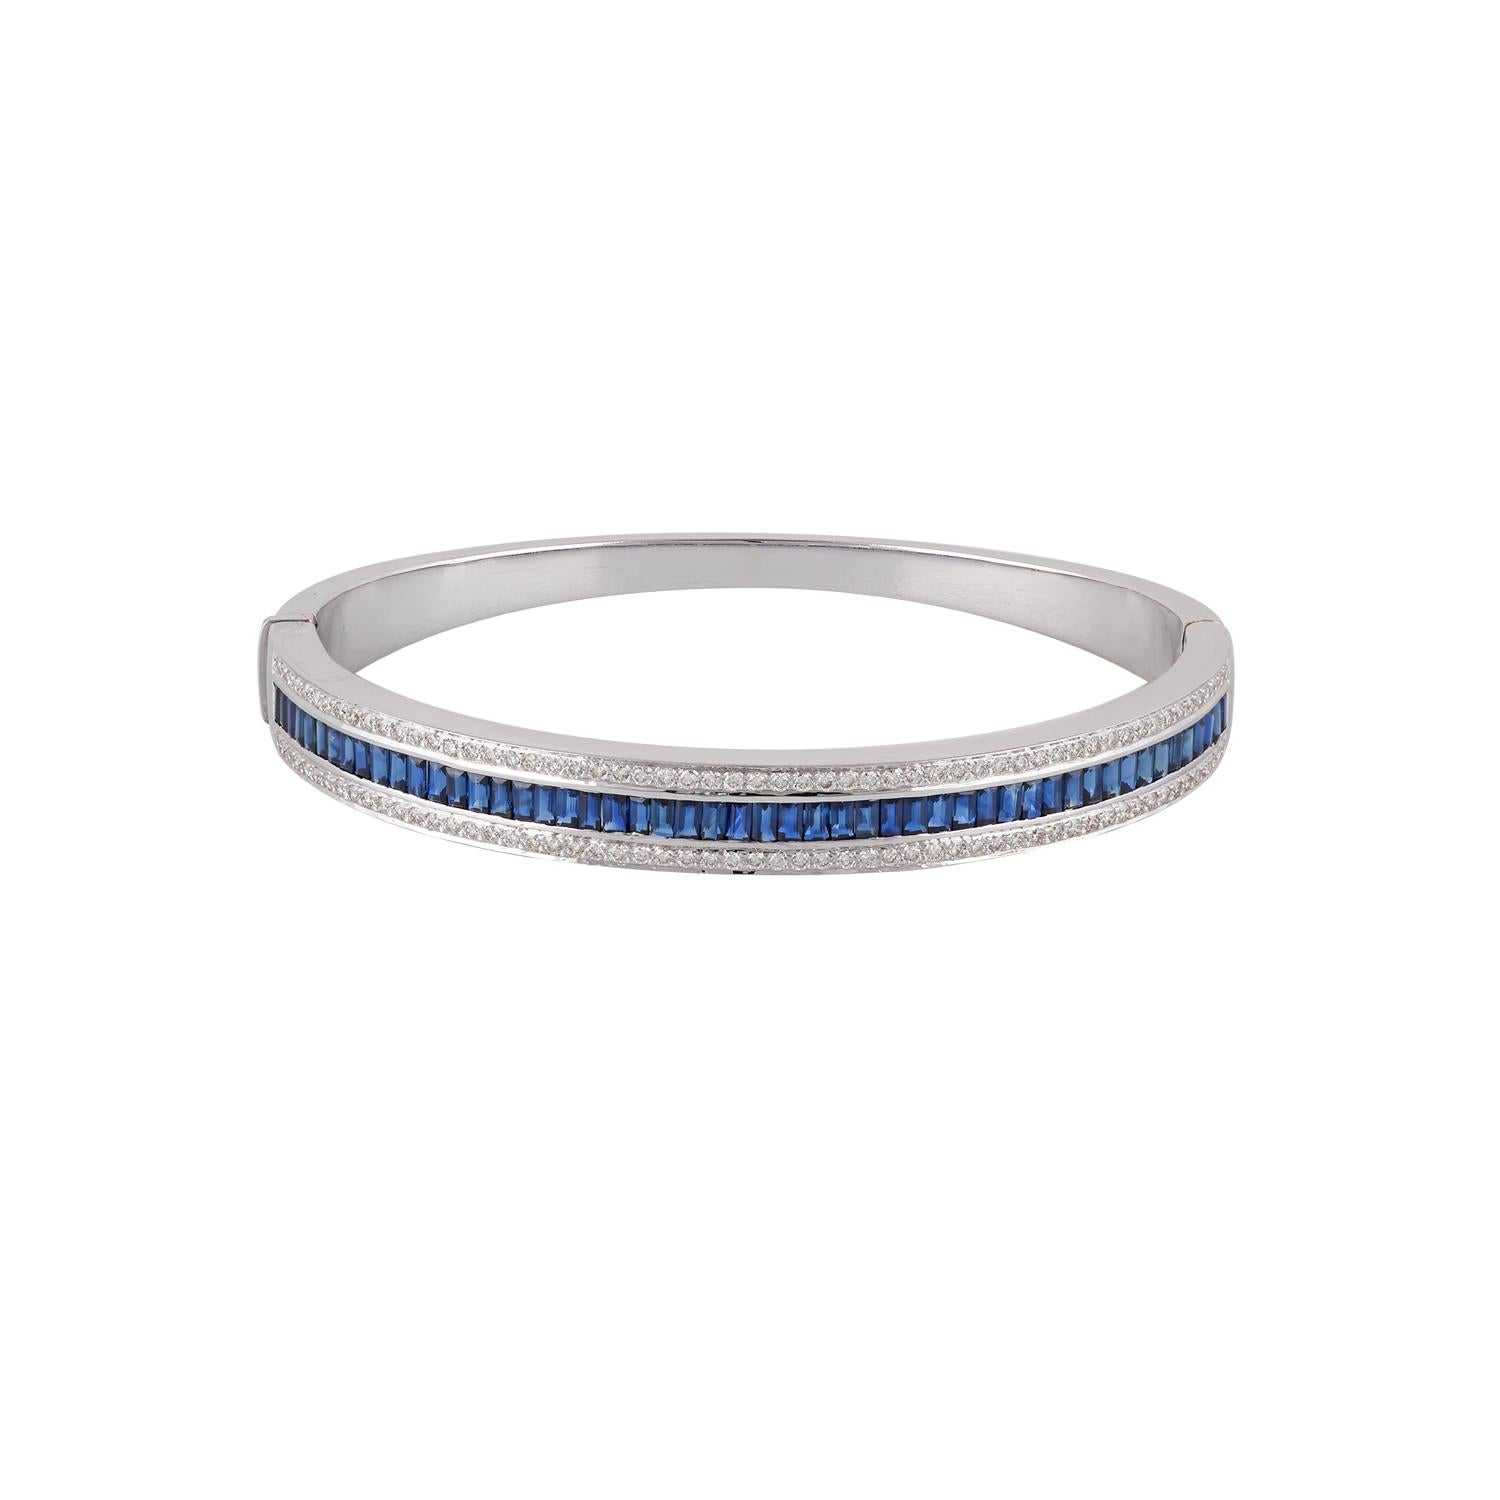 Its a classic bangle studded with blue sapphire & diamonds features 51 pieces of baguette shaped blue sapphires weight 3.58 carats with 114 pieces of round shaped diamonds weight 0.88 carats this bangle entirely made of 18k white gold weight 26.97